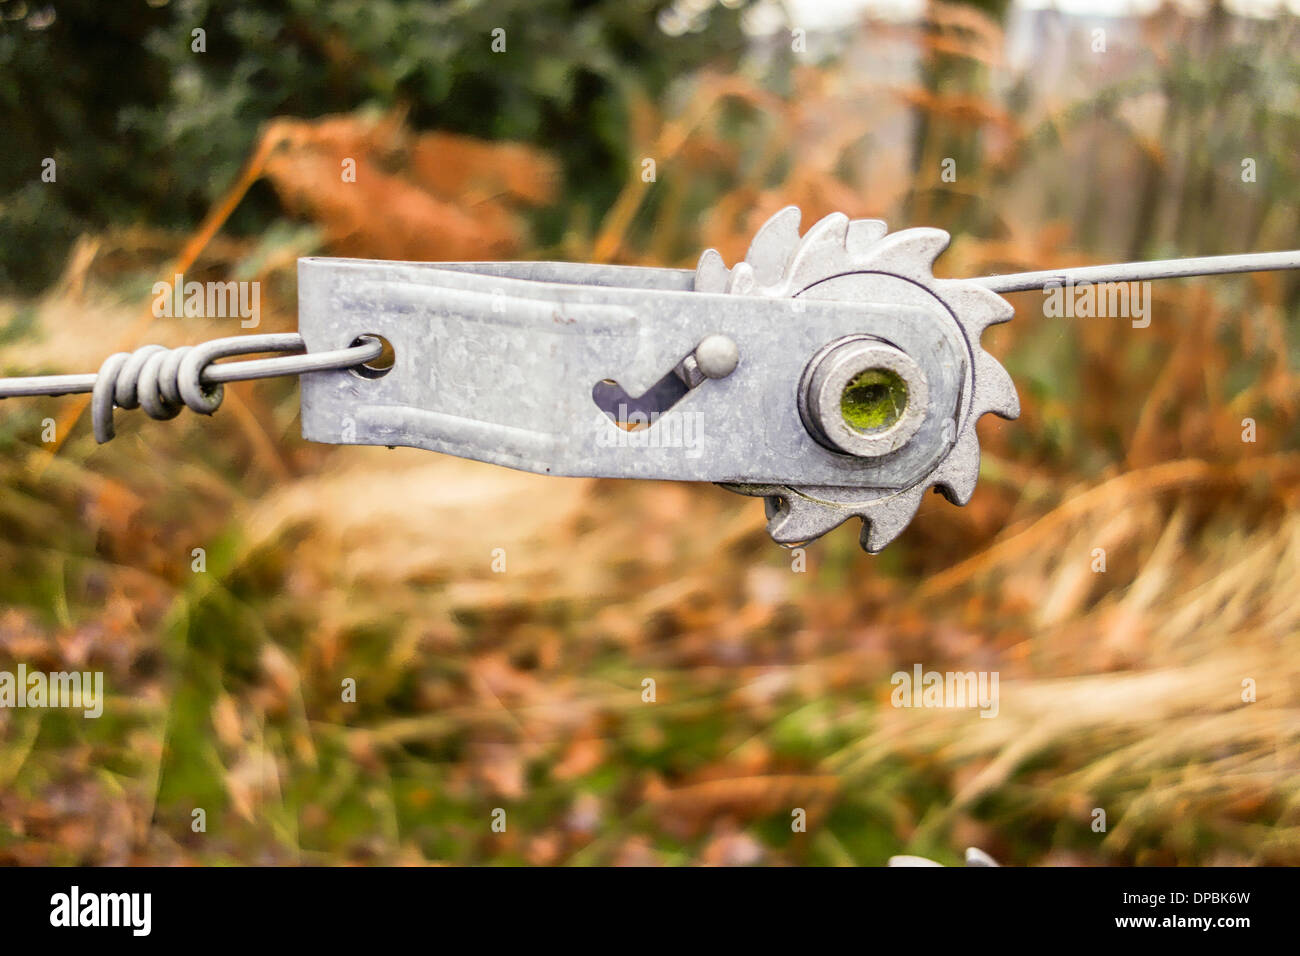 Wire fence rachet type tensioner used to join two ends of the wire together Stock Photo